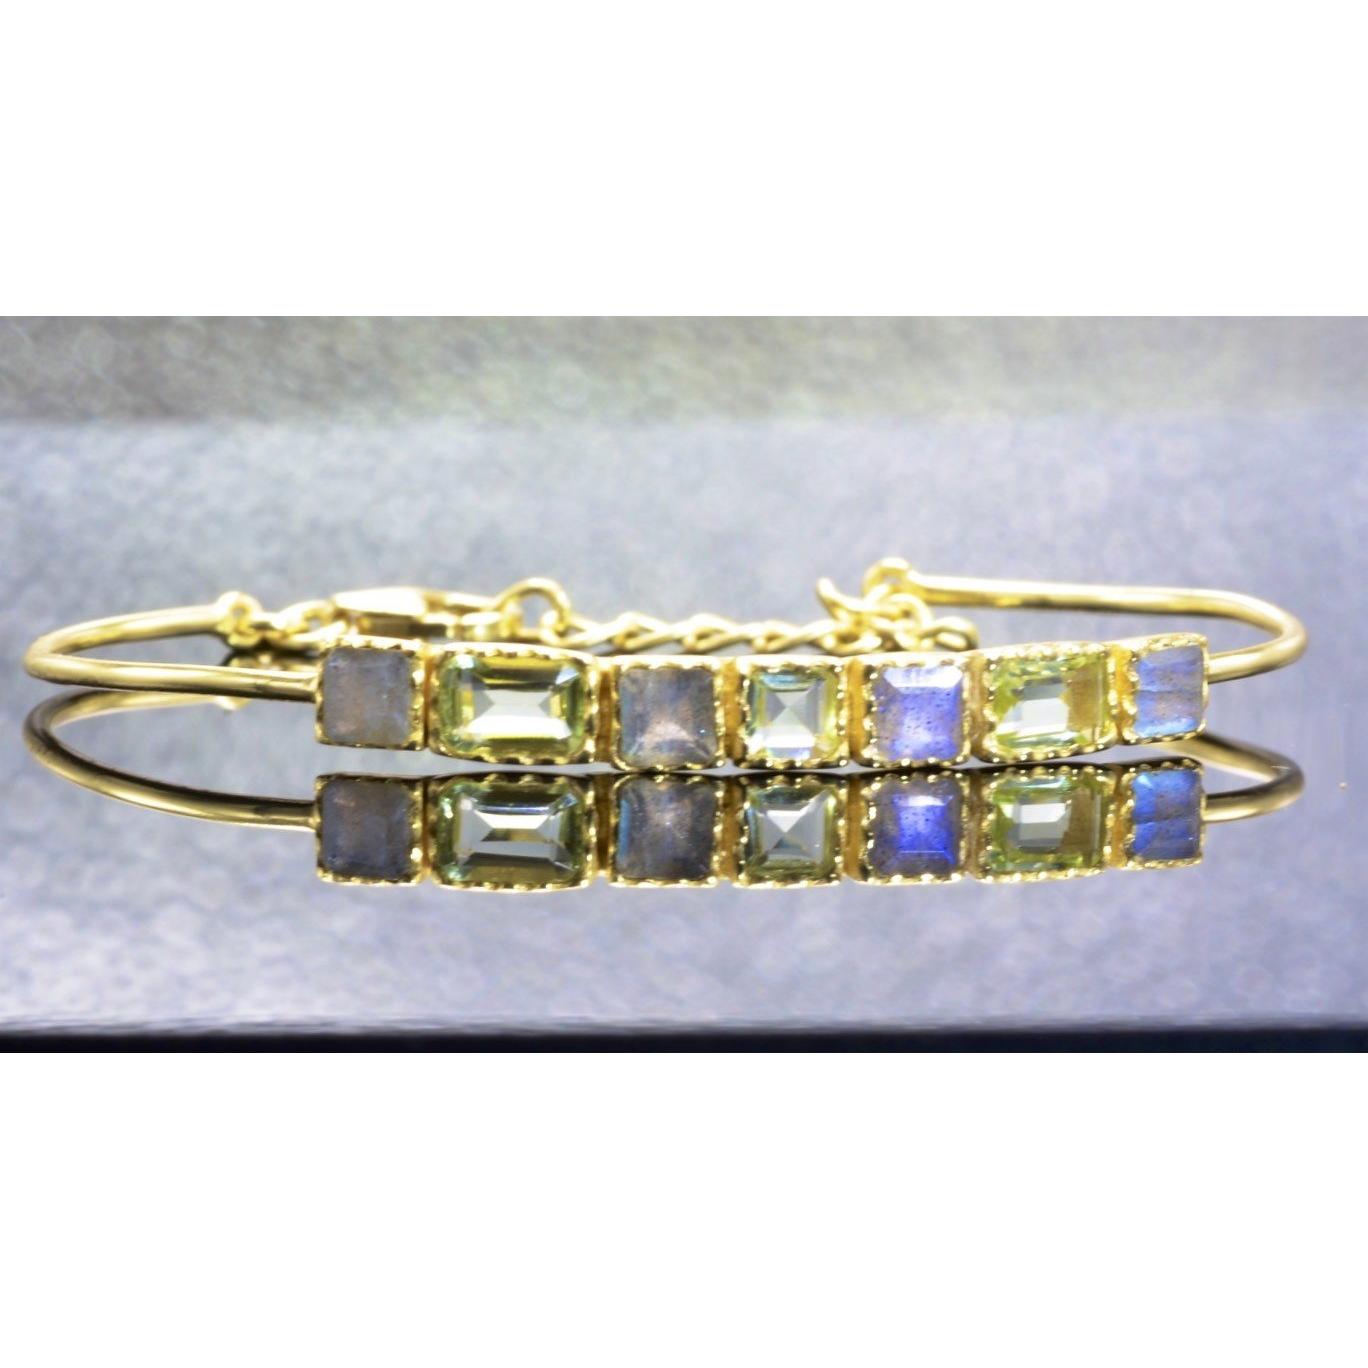 Sterling Silver Gemstone Bracelet With Green Amethyst and Labradorite - PCH Rings